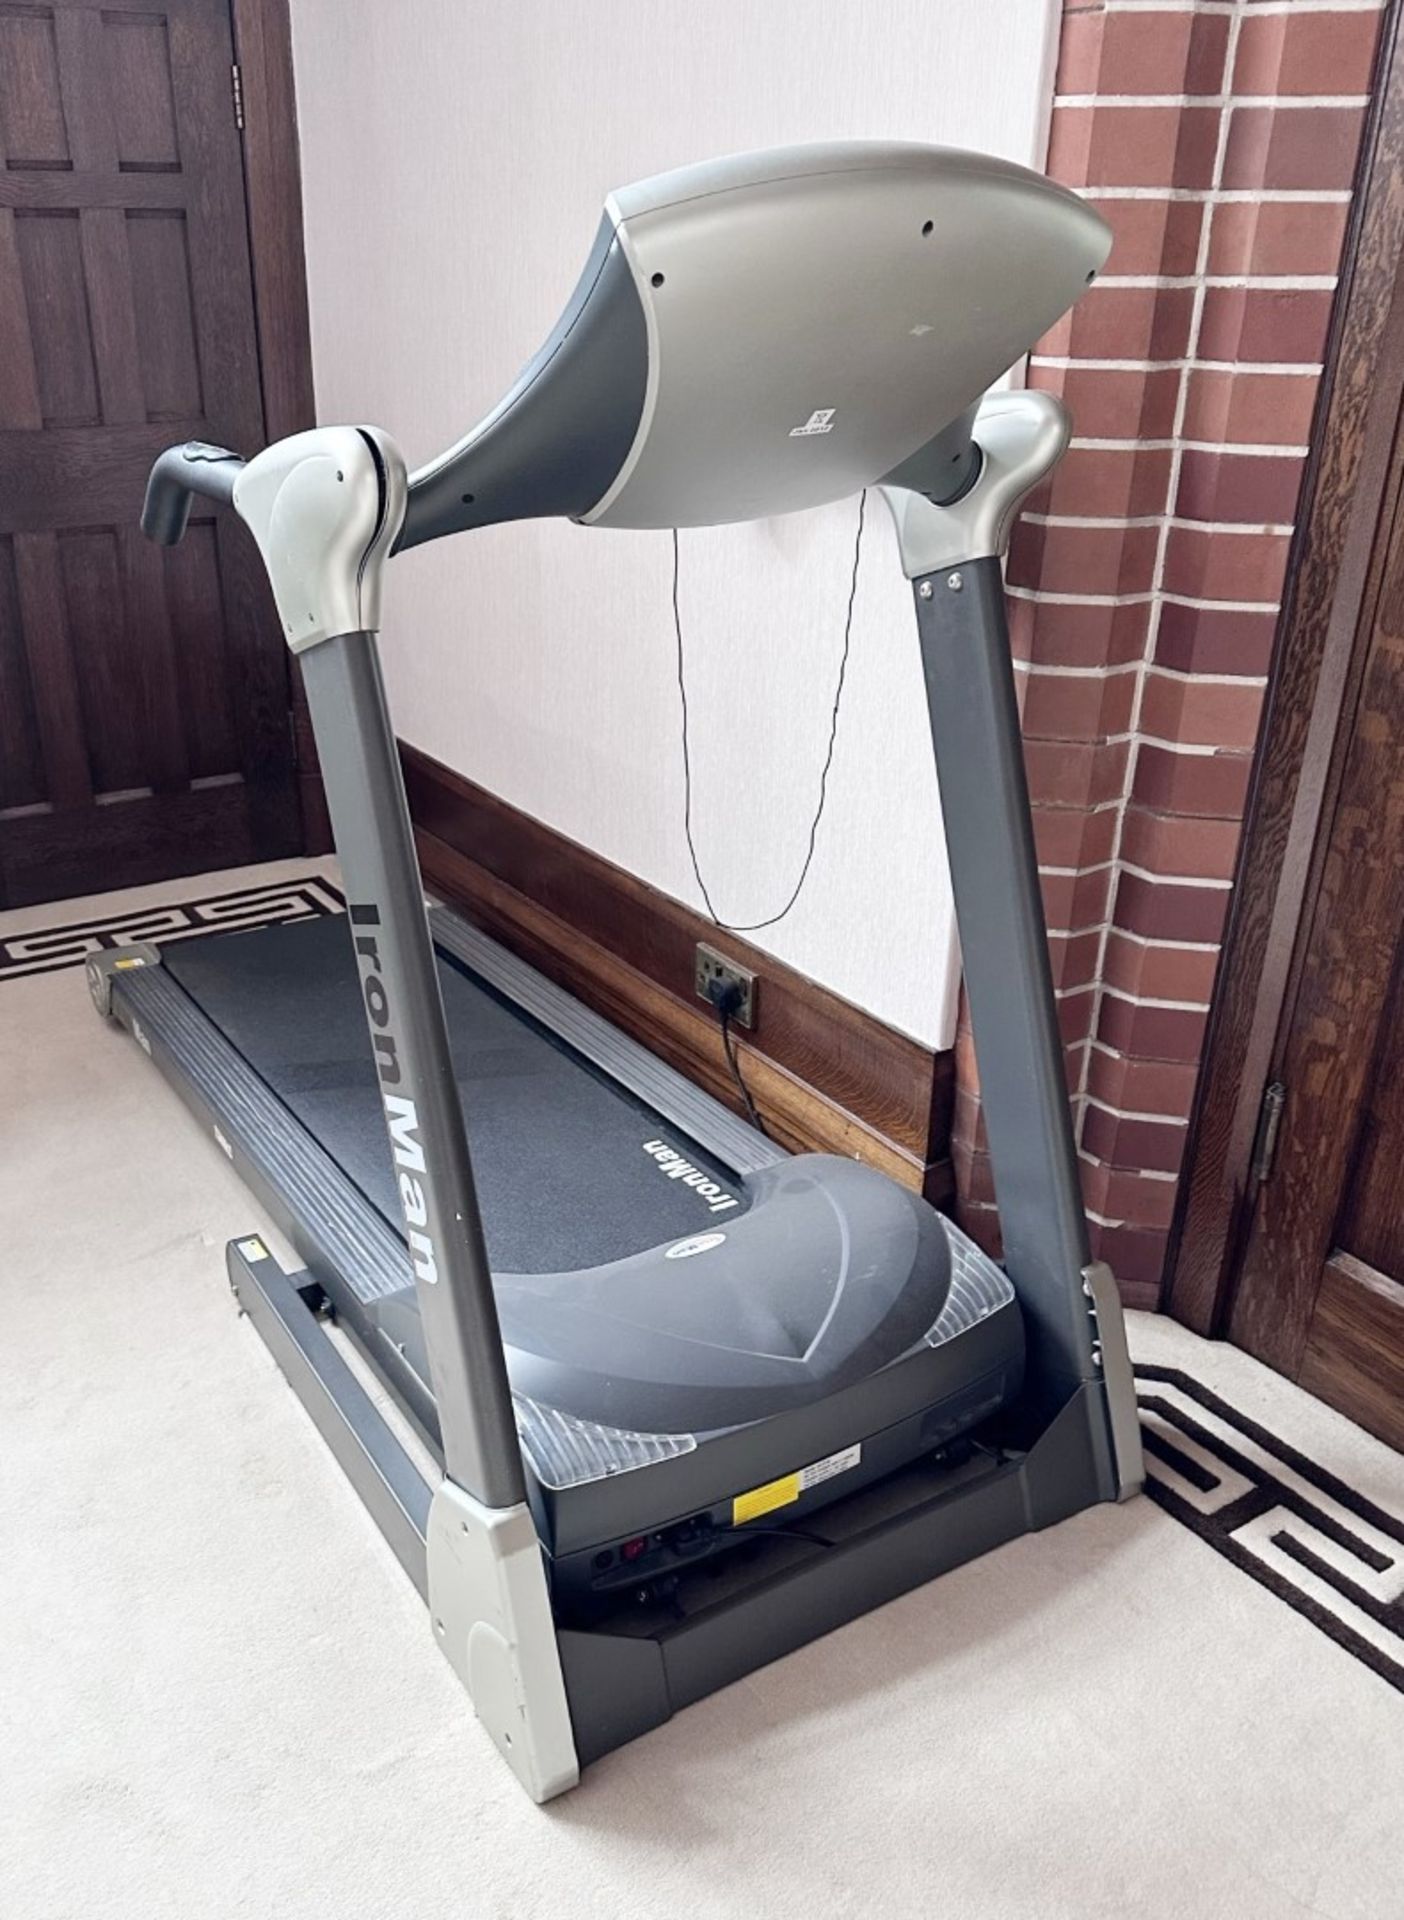 1 x IRON MAN D160 Running Machine With Backlit Screen And Speed/Incline Control Handlebars.